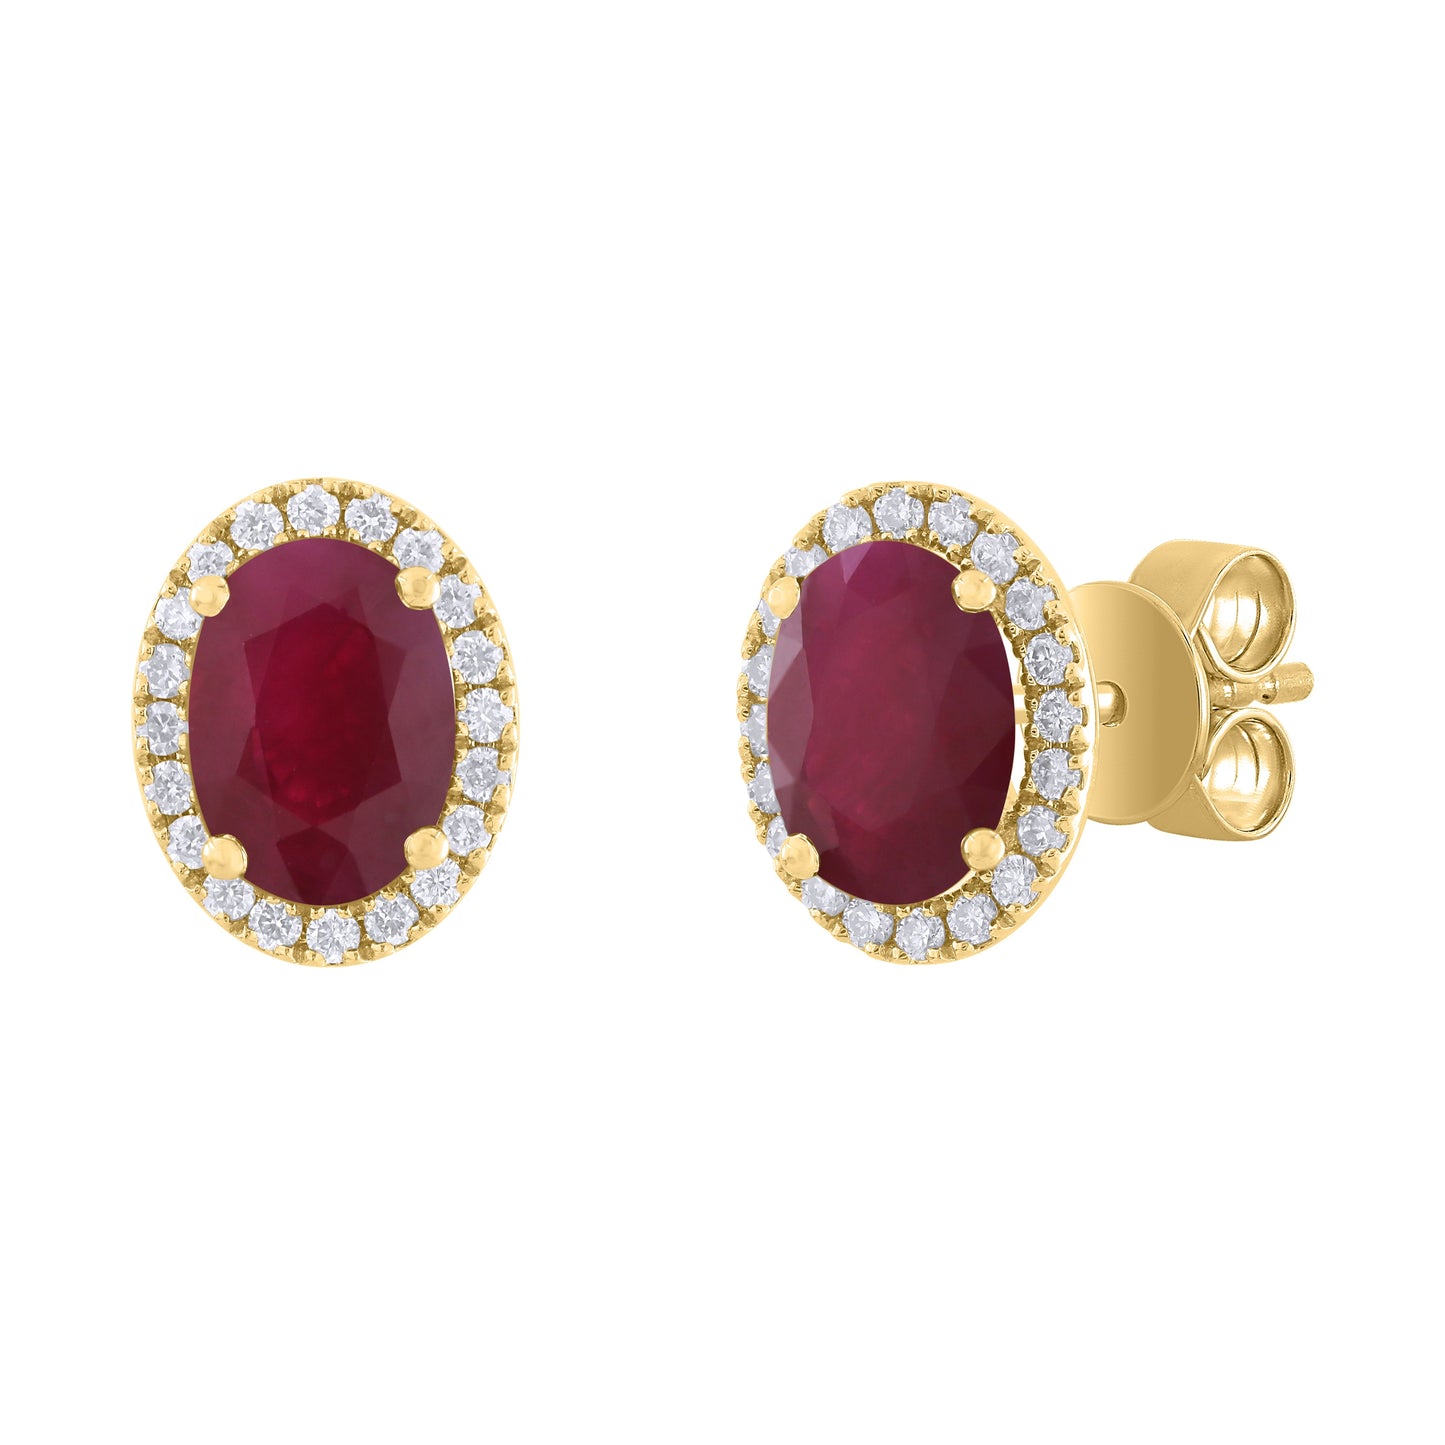 14K Gold Oval Diamond and Color Stone Earrings